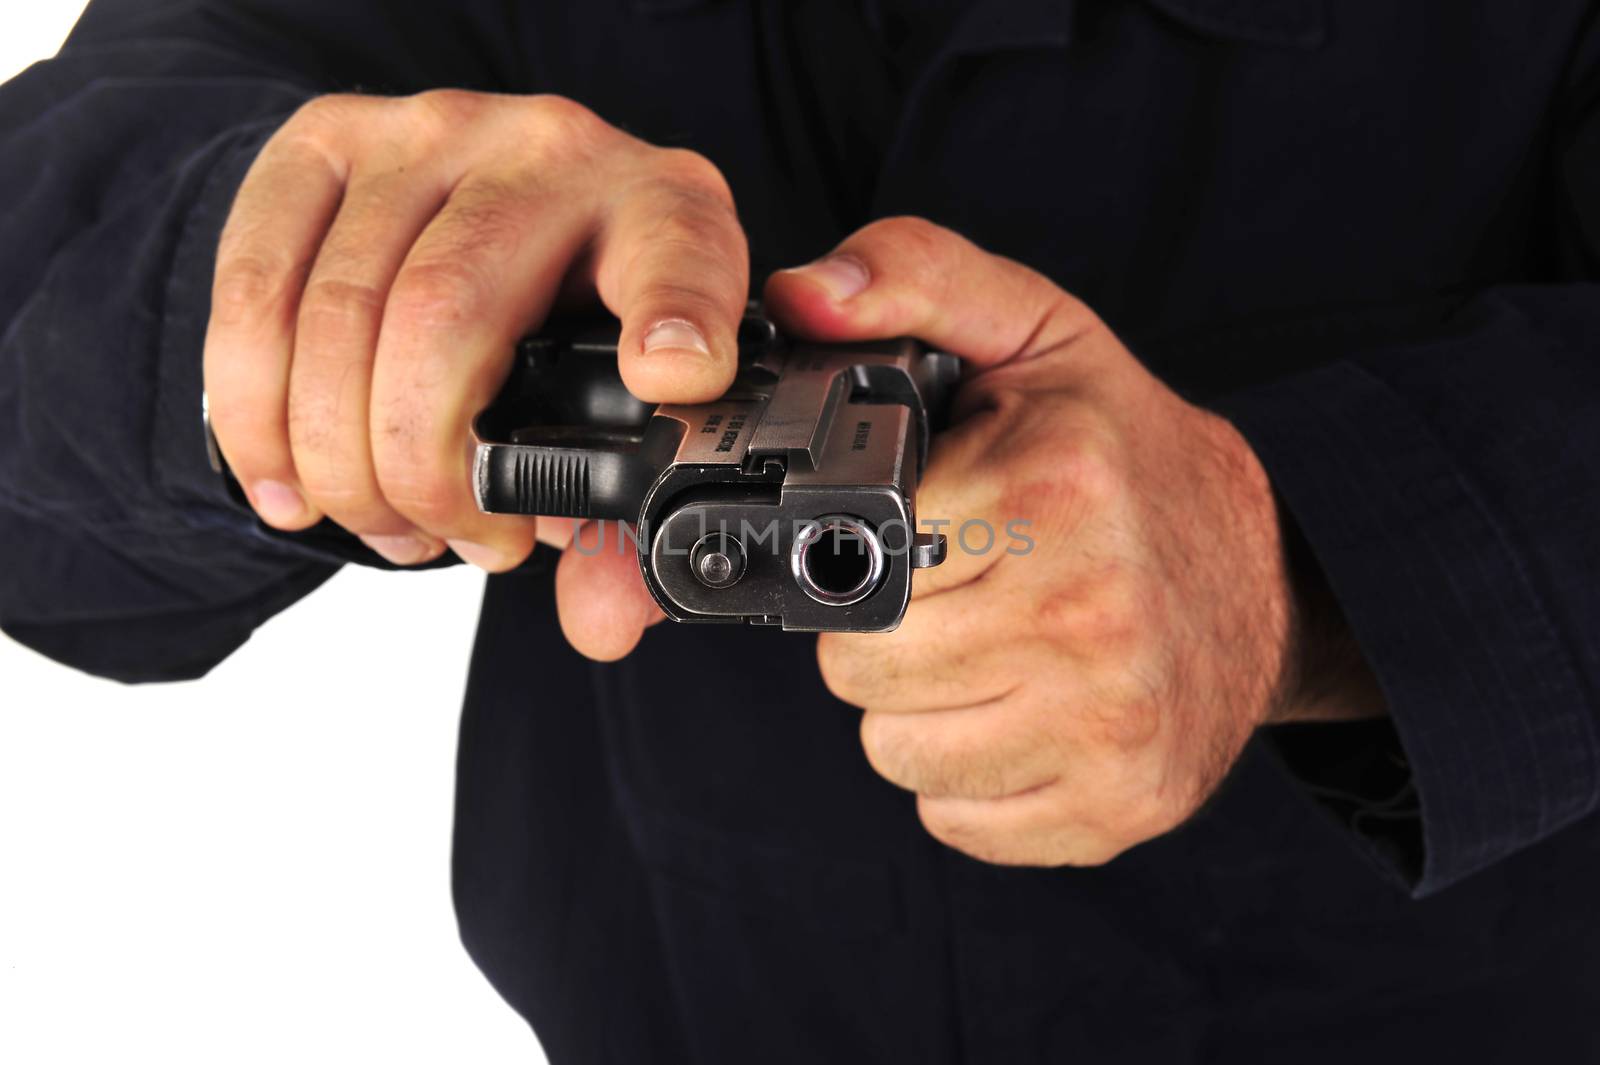 Close up view on gun in the hand on white background